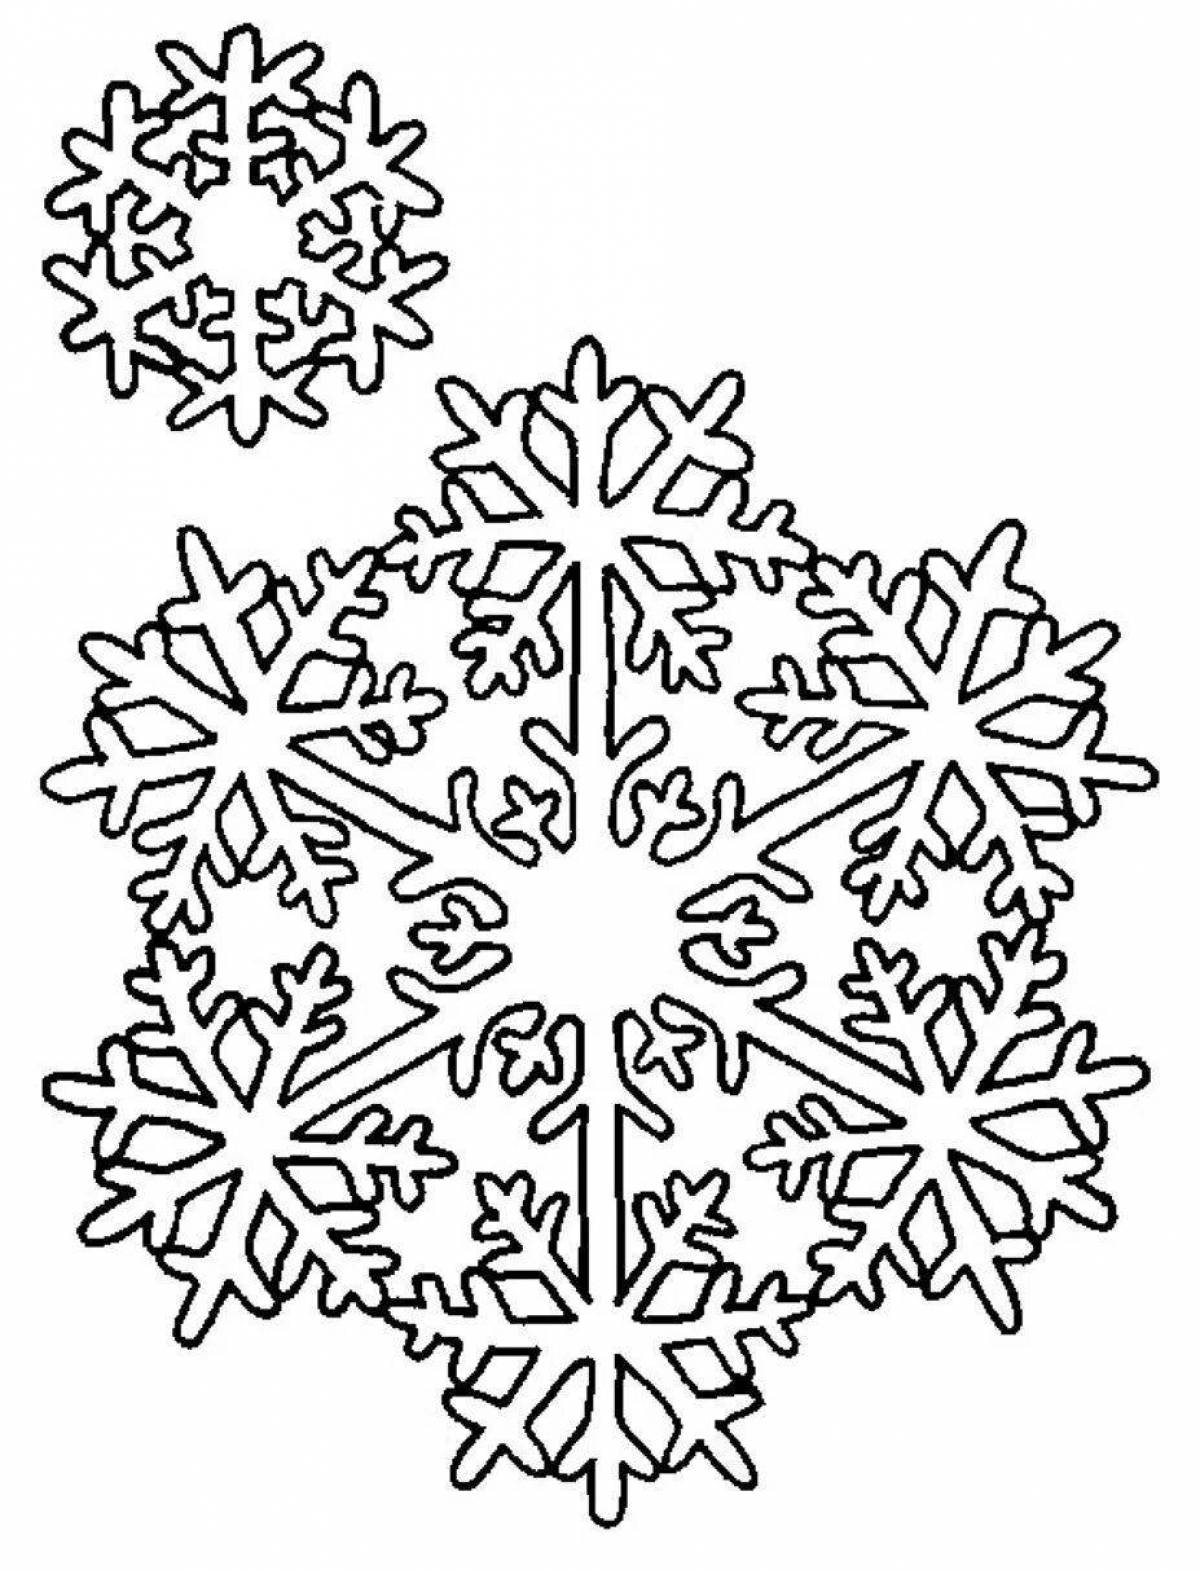 Wonderful coloring book with snowflakes